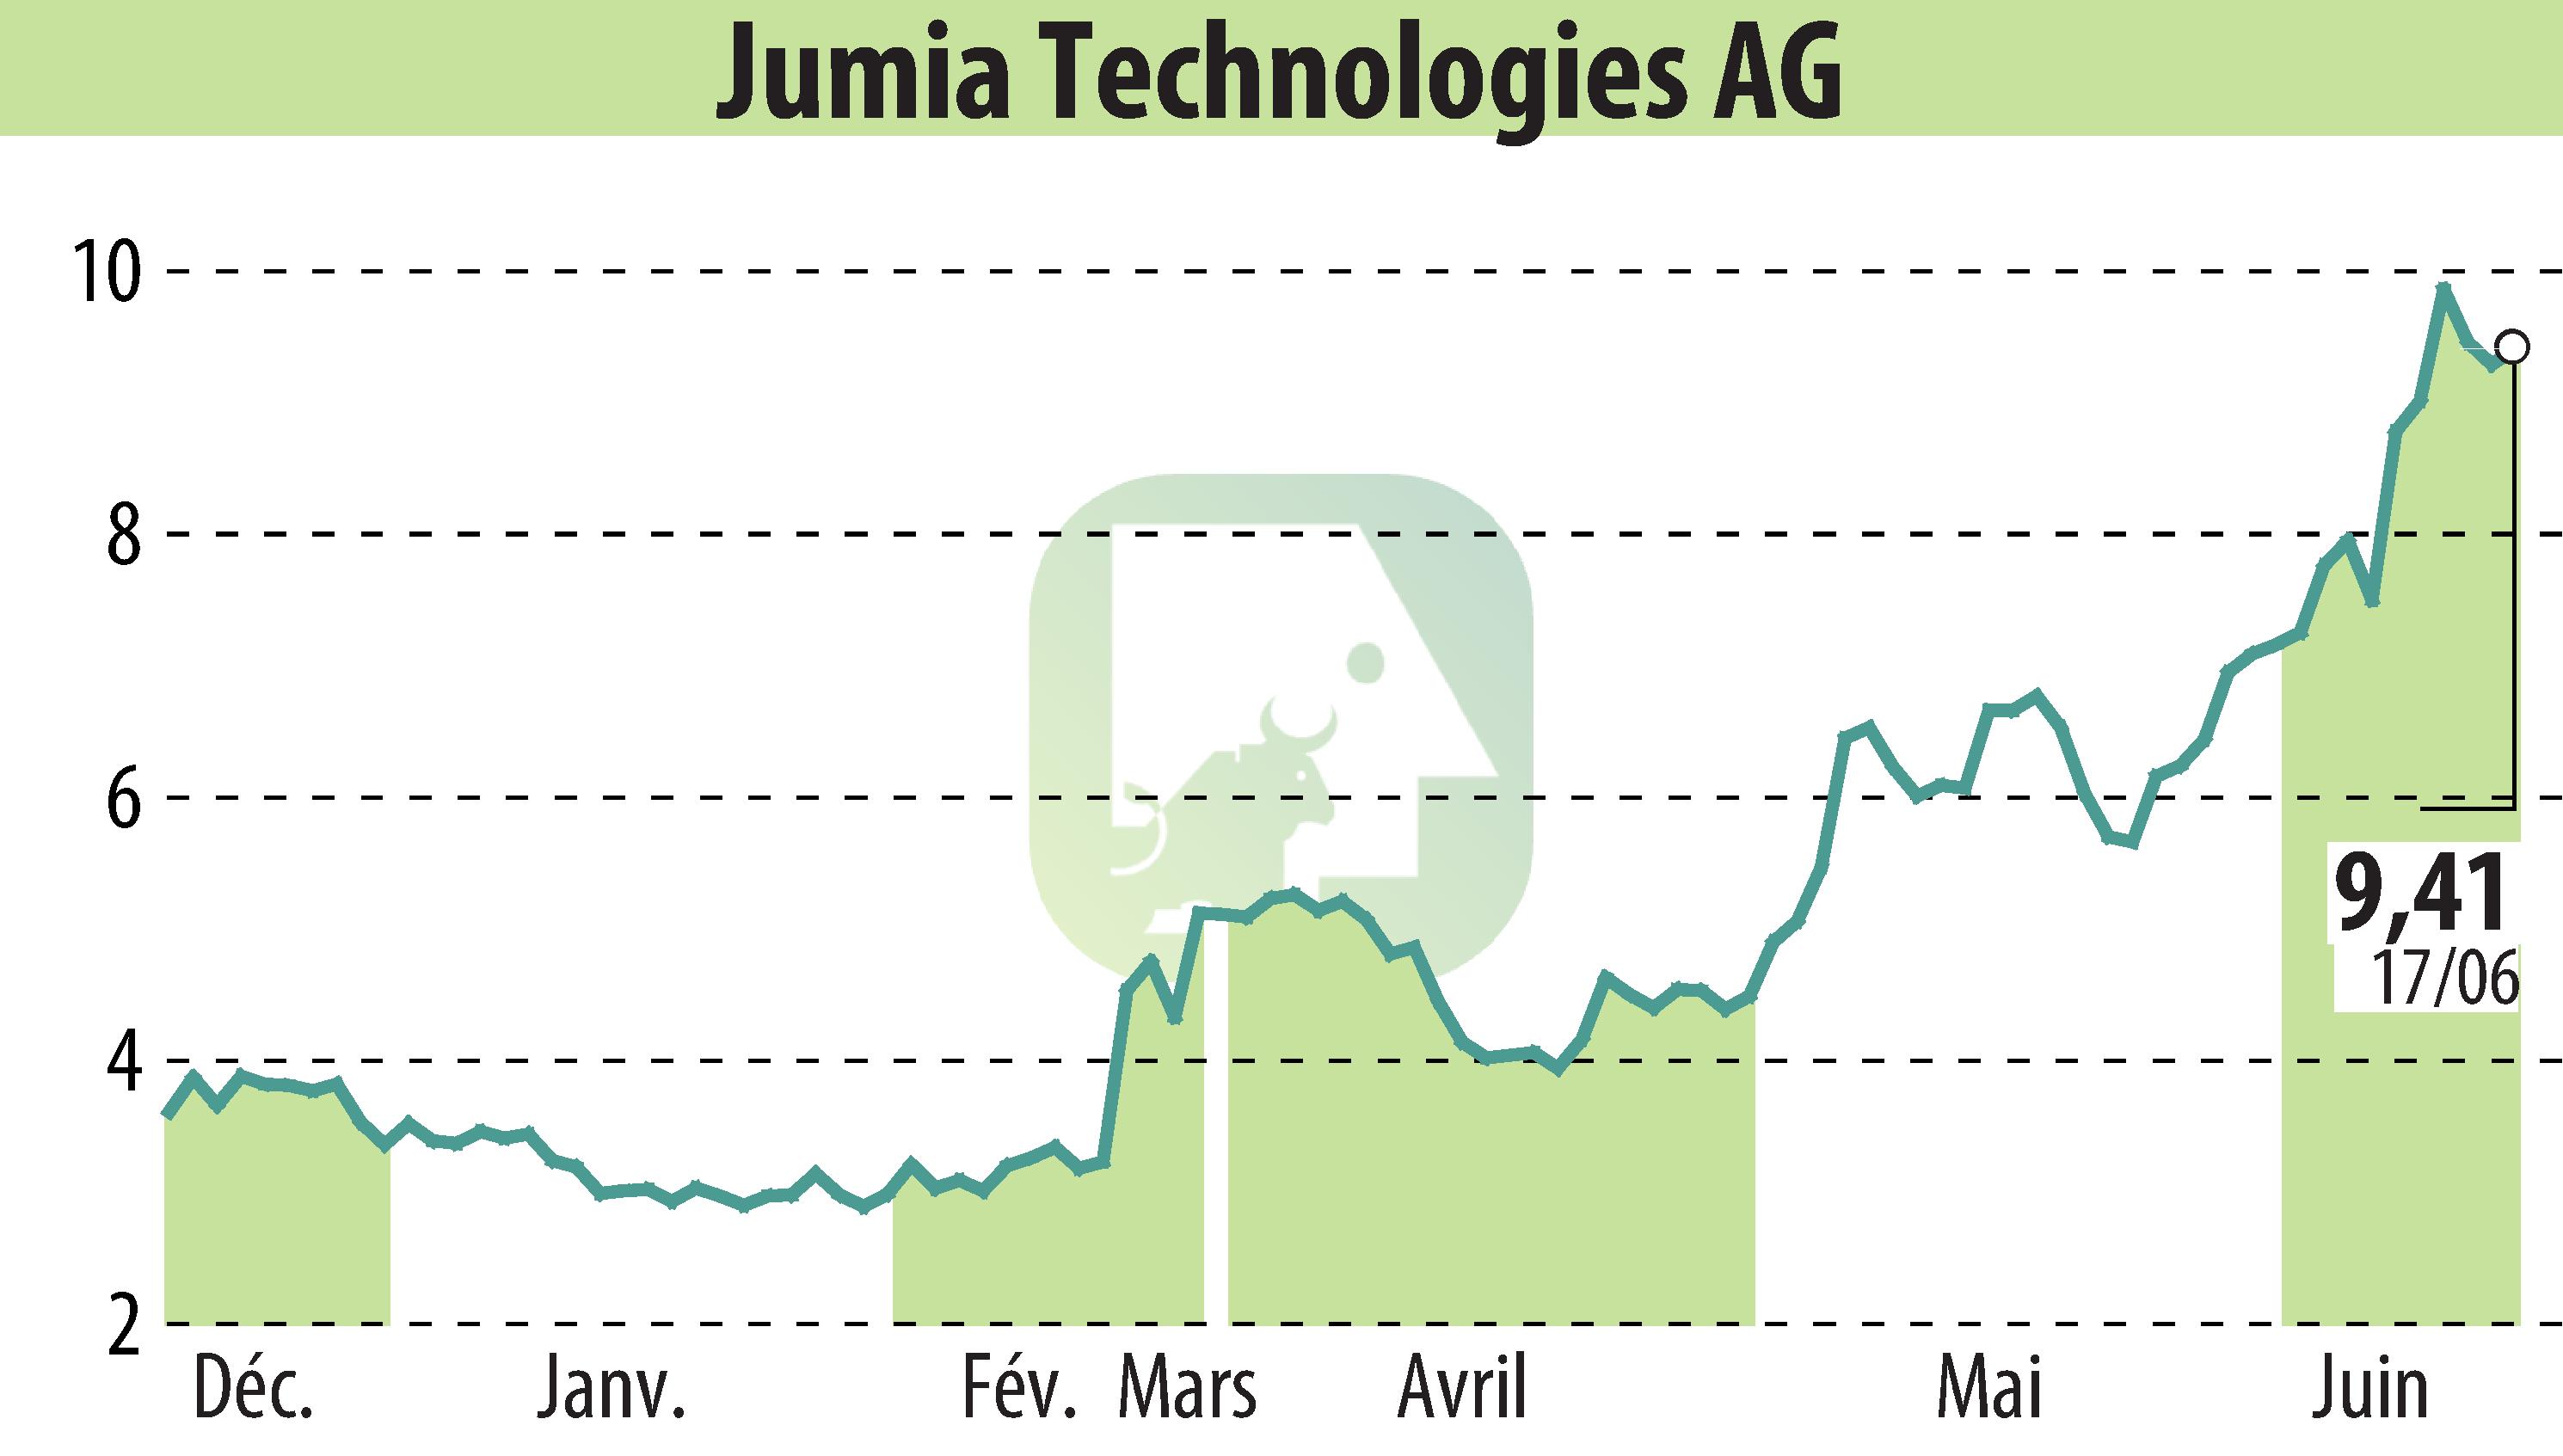 Stock price chart of Jumia Technologies AG (EBR:JMIA) showing fluctuations.